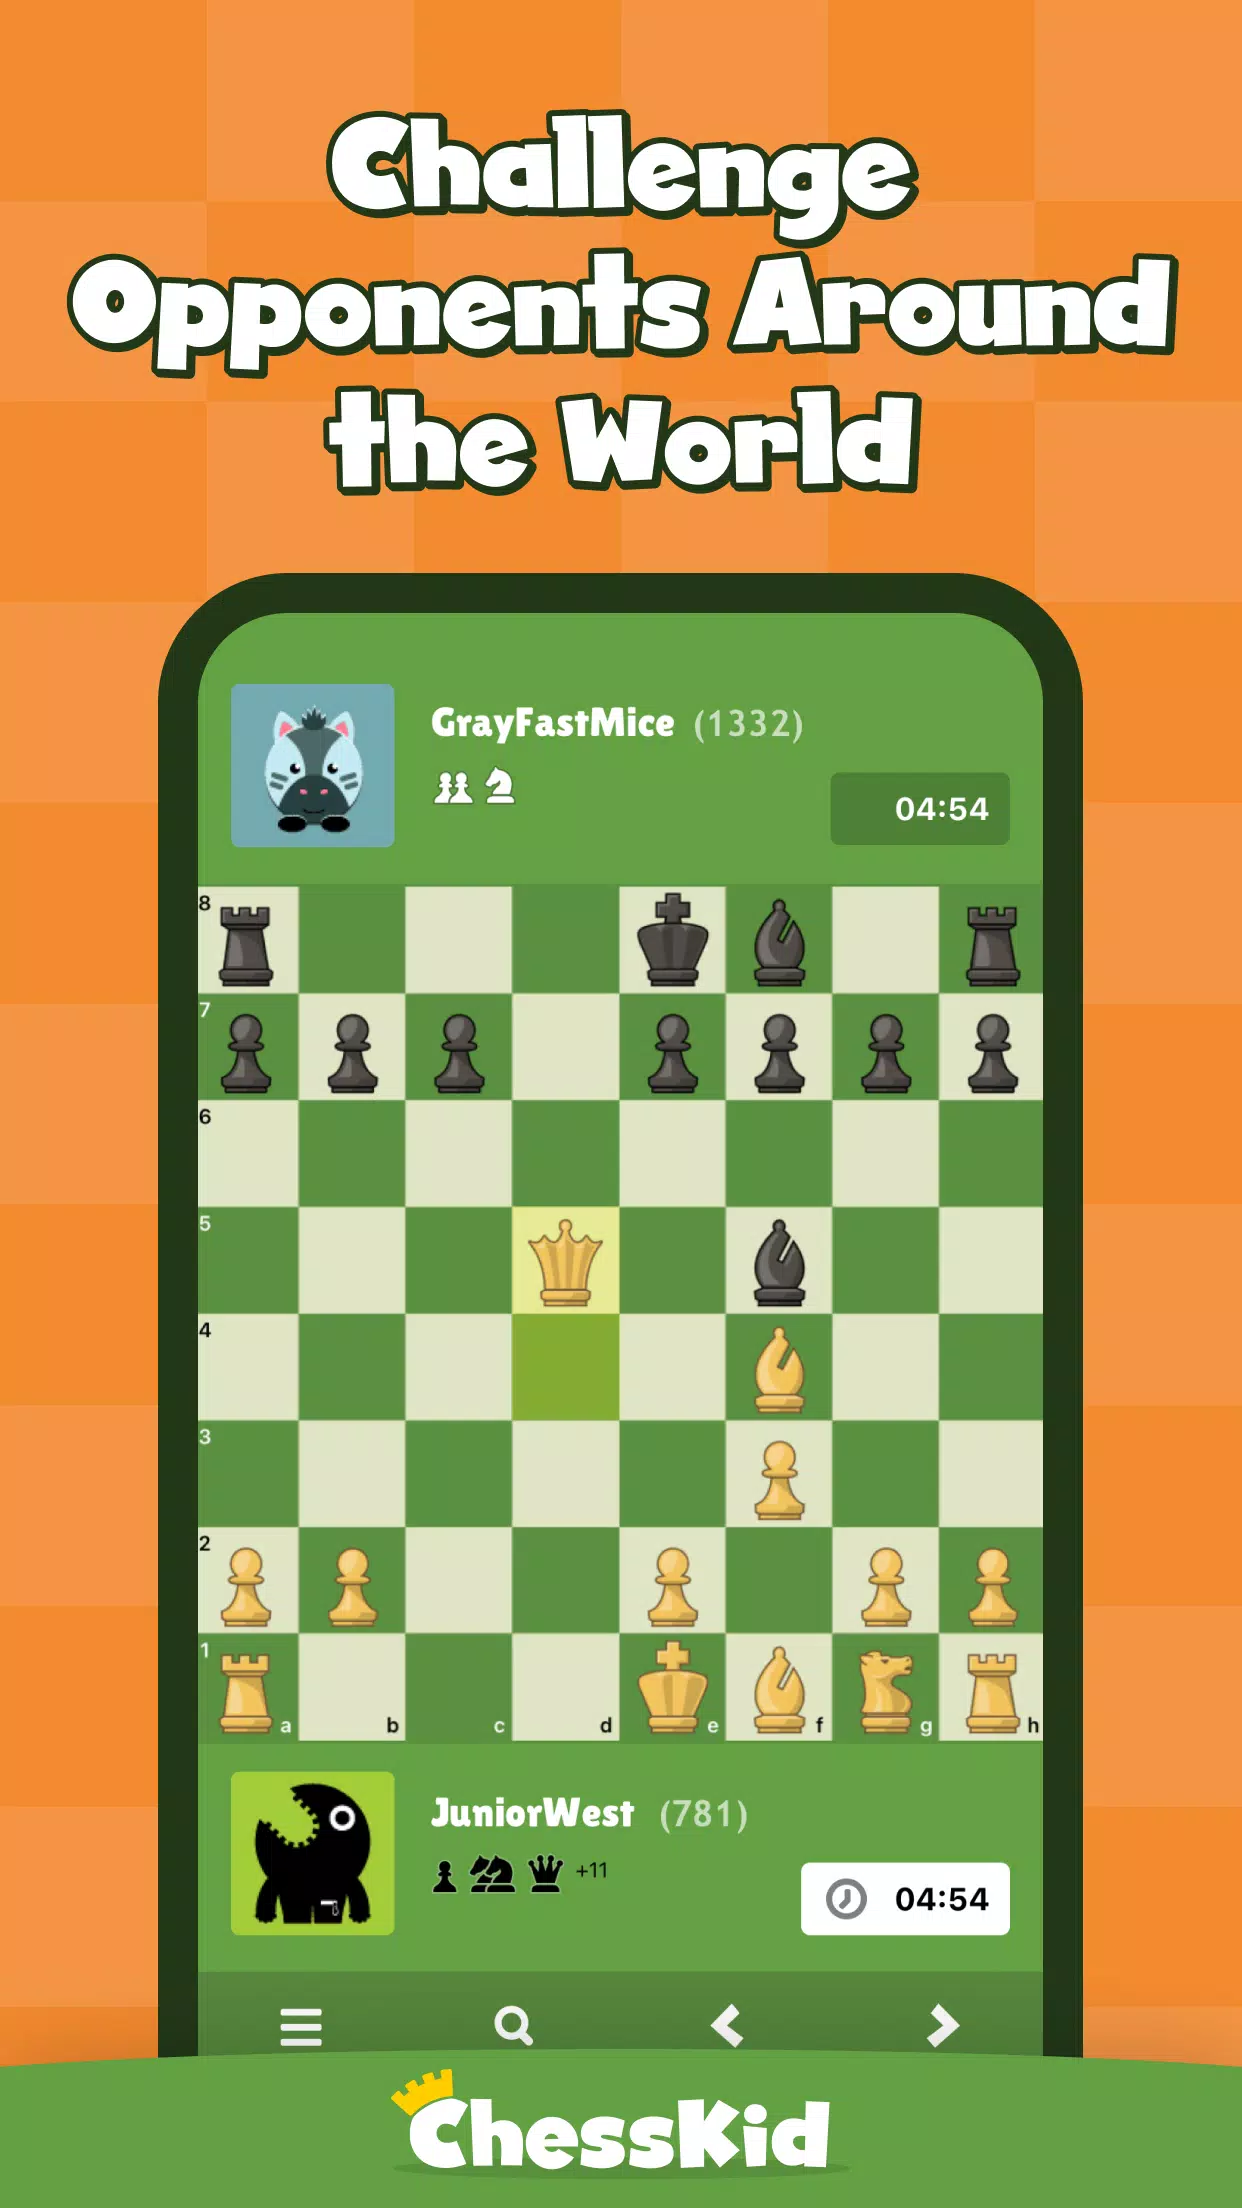 Chess - Play and Learn APK for Android - Download